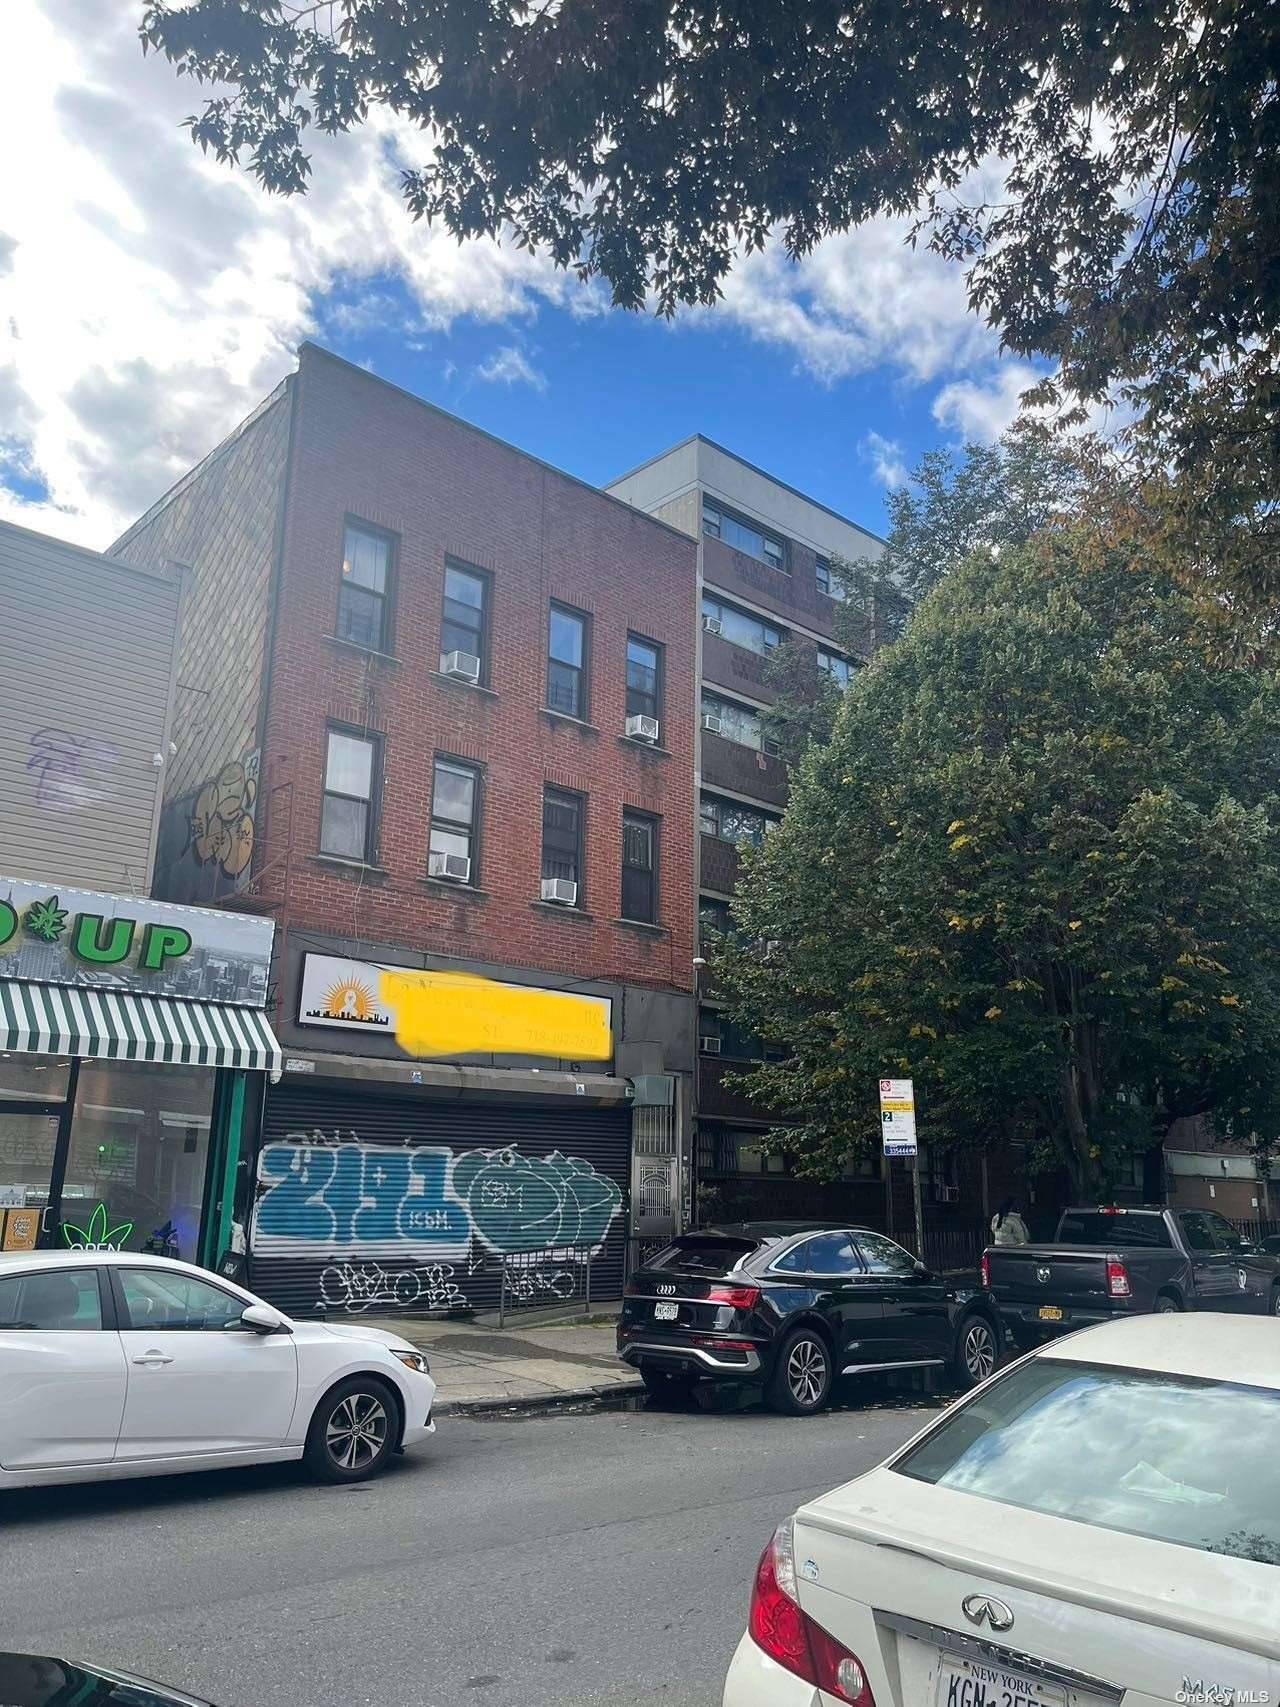 Excellent invesement property 2 family mixed use building with first FL restaurant, 2FL amp ; 3FL each 4 bedroom apartment, good income, easy to show.